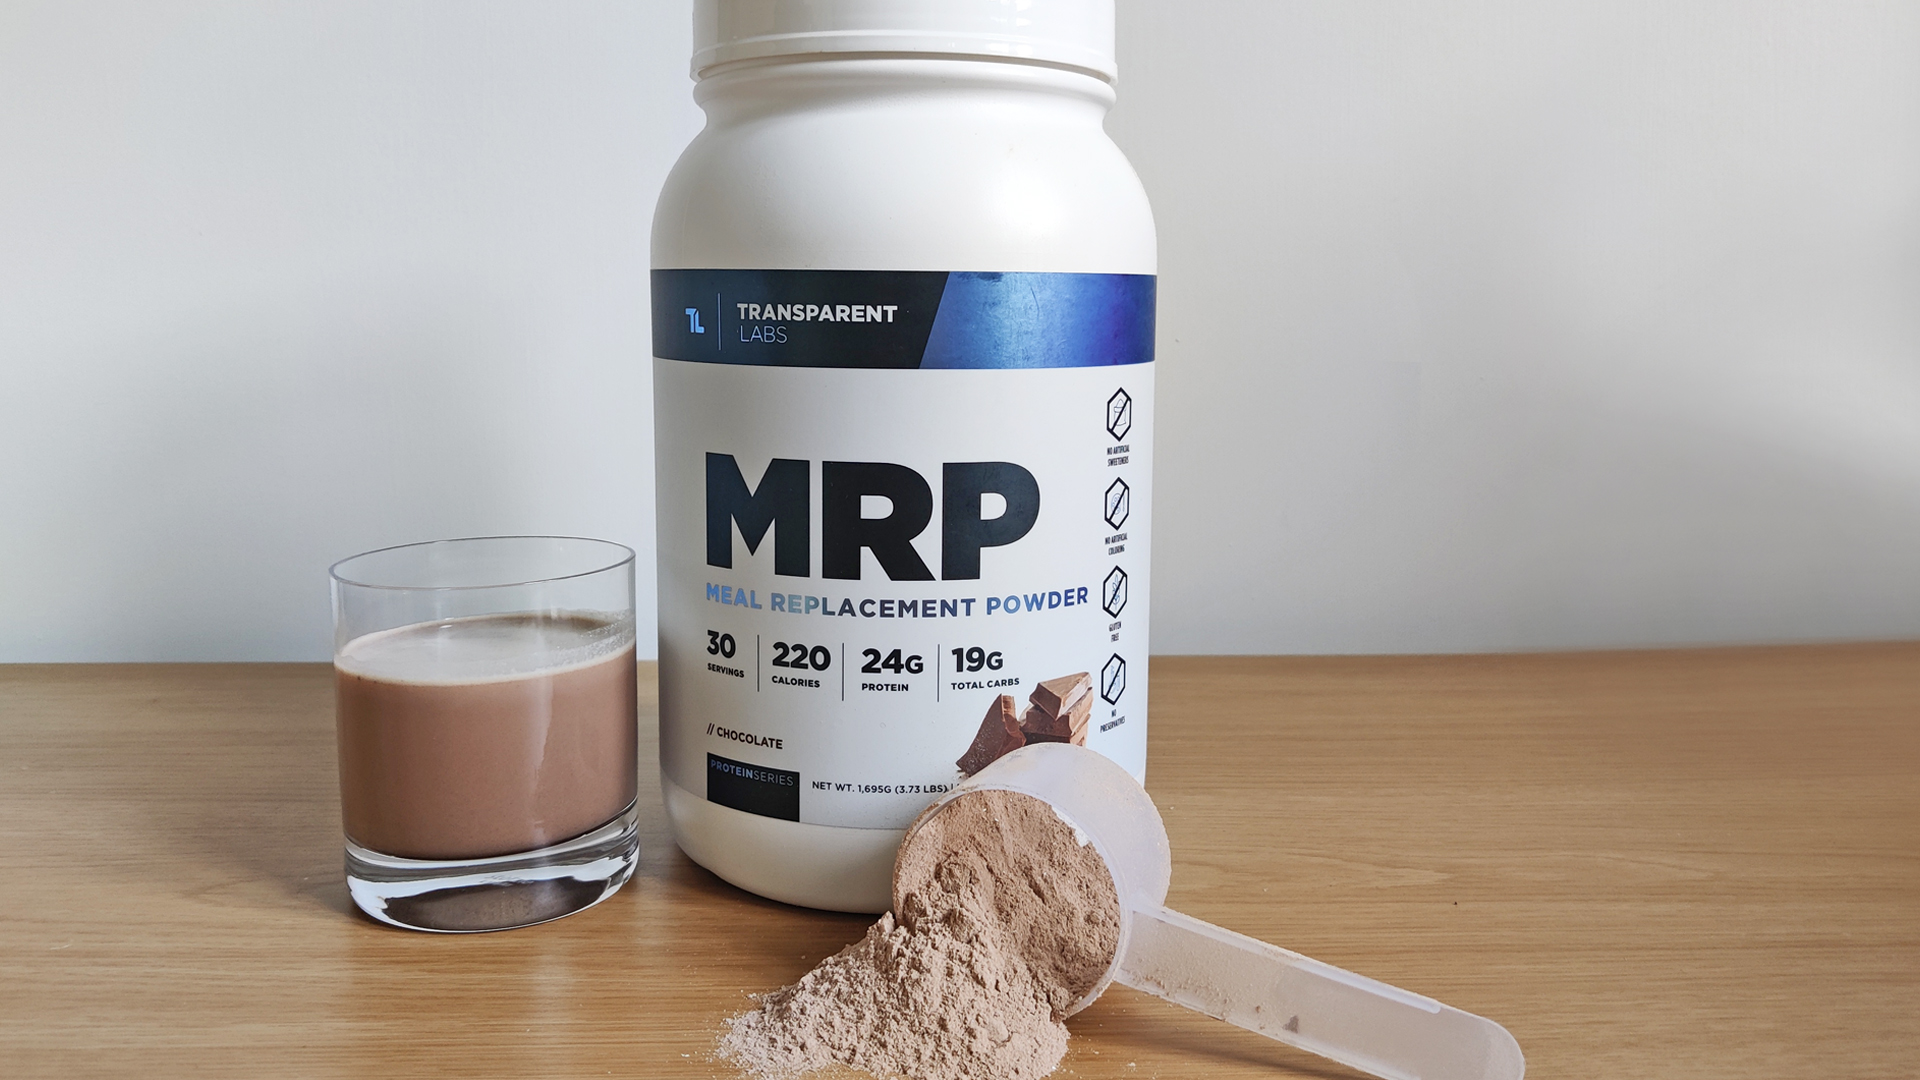 Transparent Labs Meal Replacement Powder (MRP)